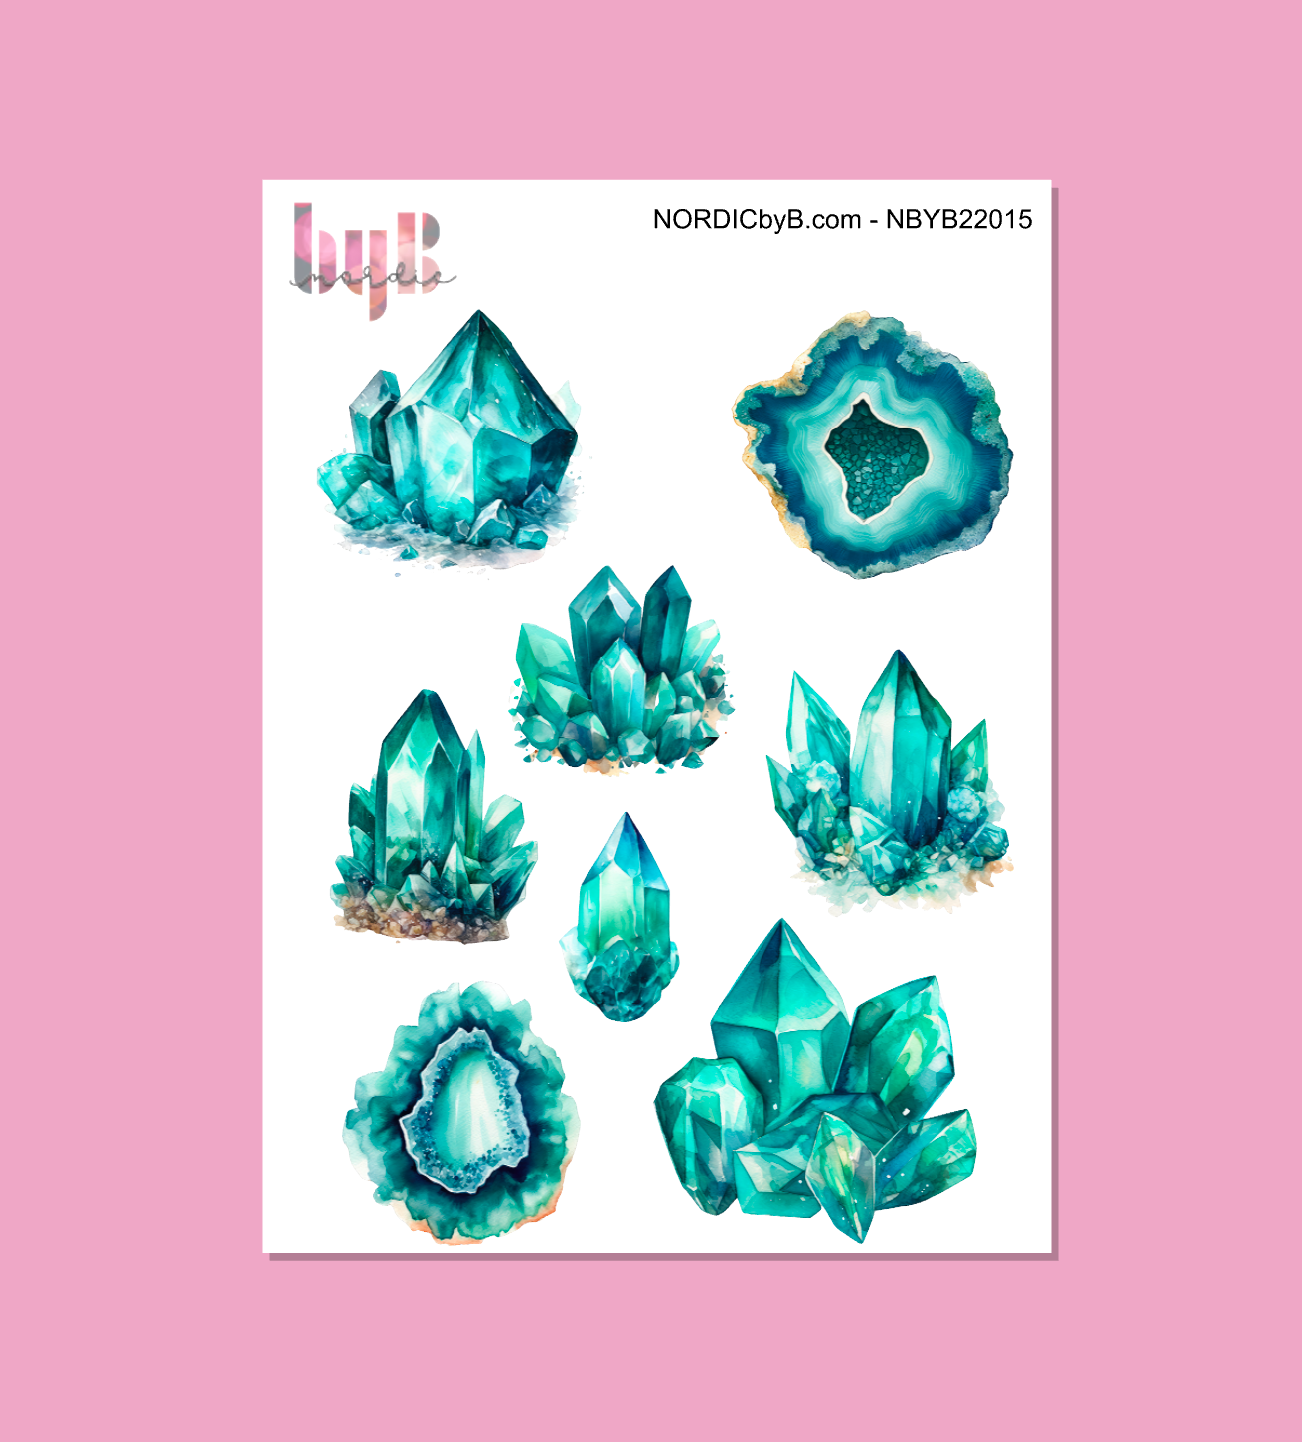 Gem Stone and Crystal Stickers - 12,5 x 17 cm - For BuJo, Decorating, Planning, Scrapbooking